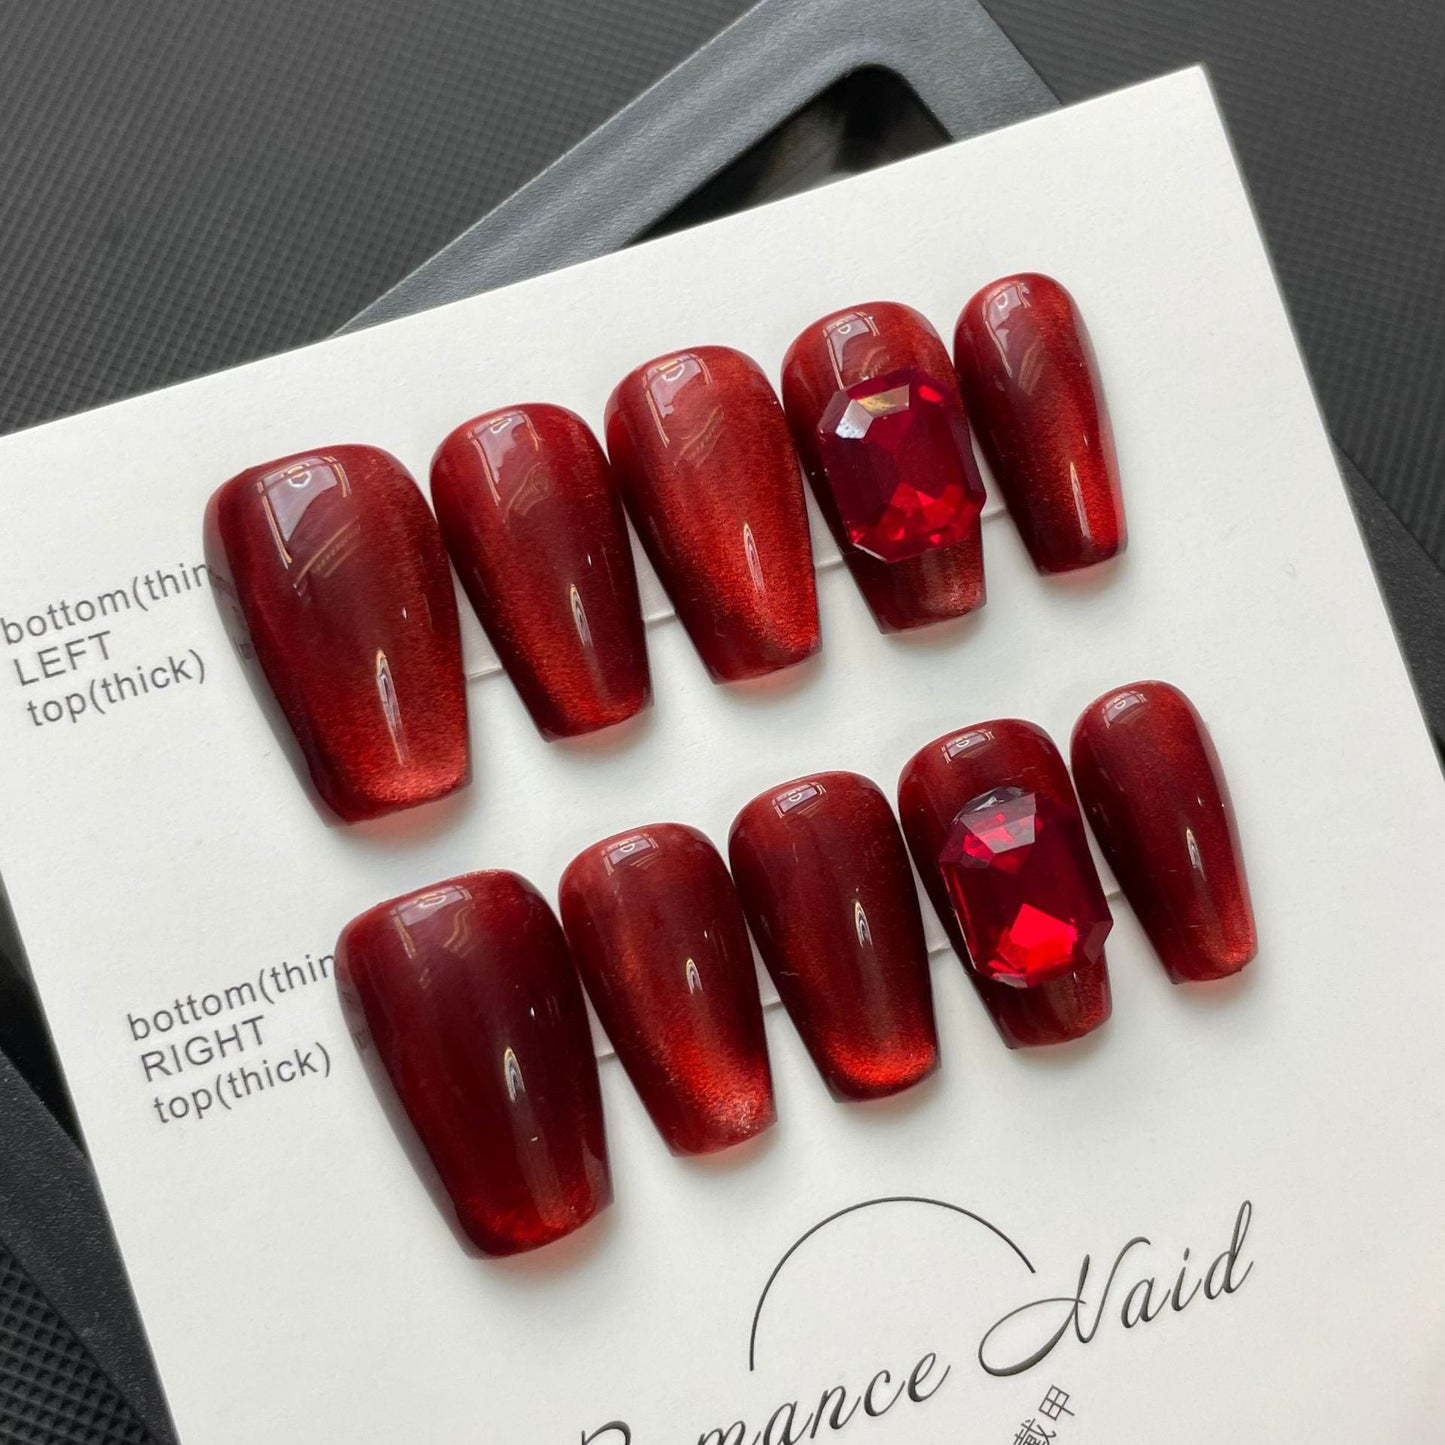 589 Red Cateye Effect press on nails 100% handmade false nails red